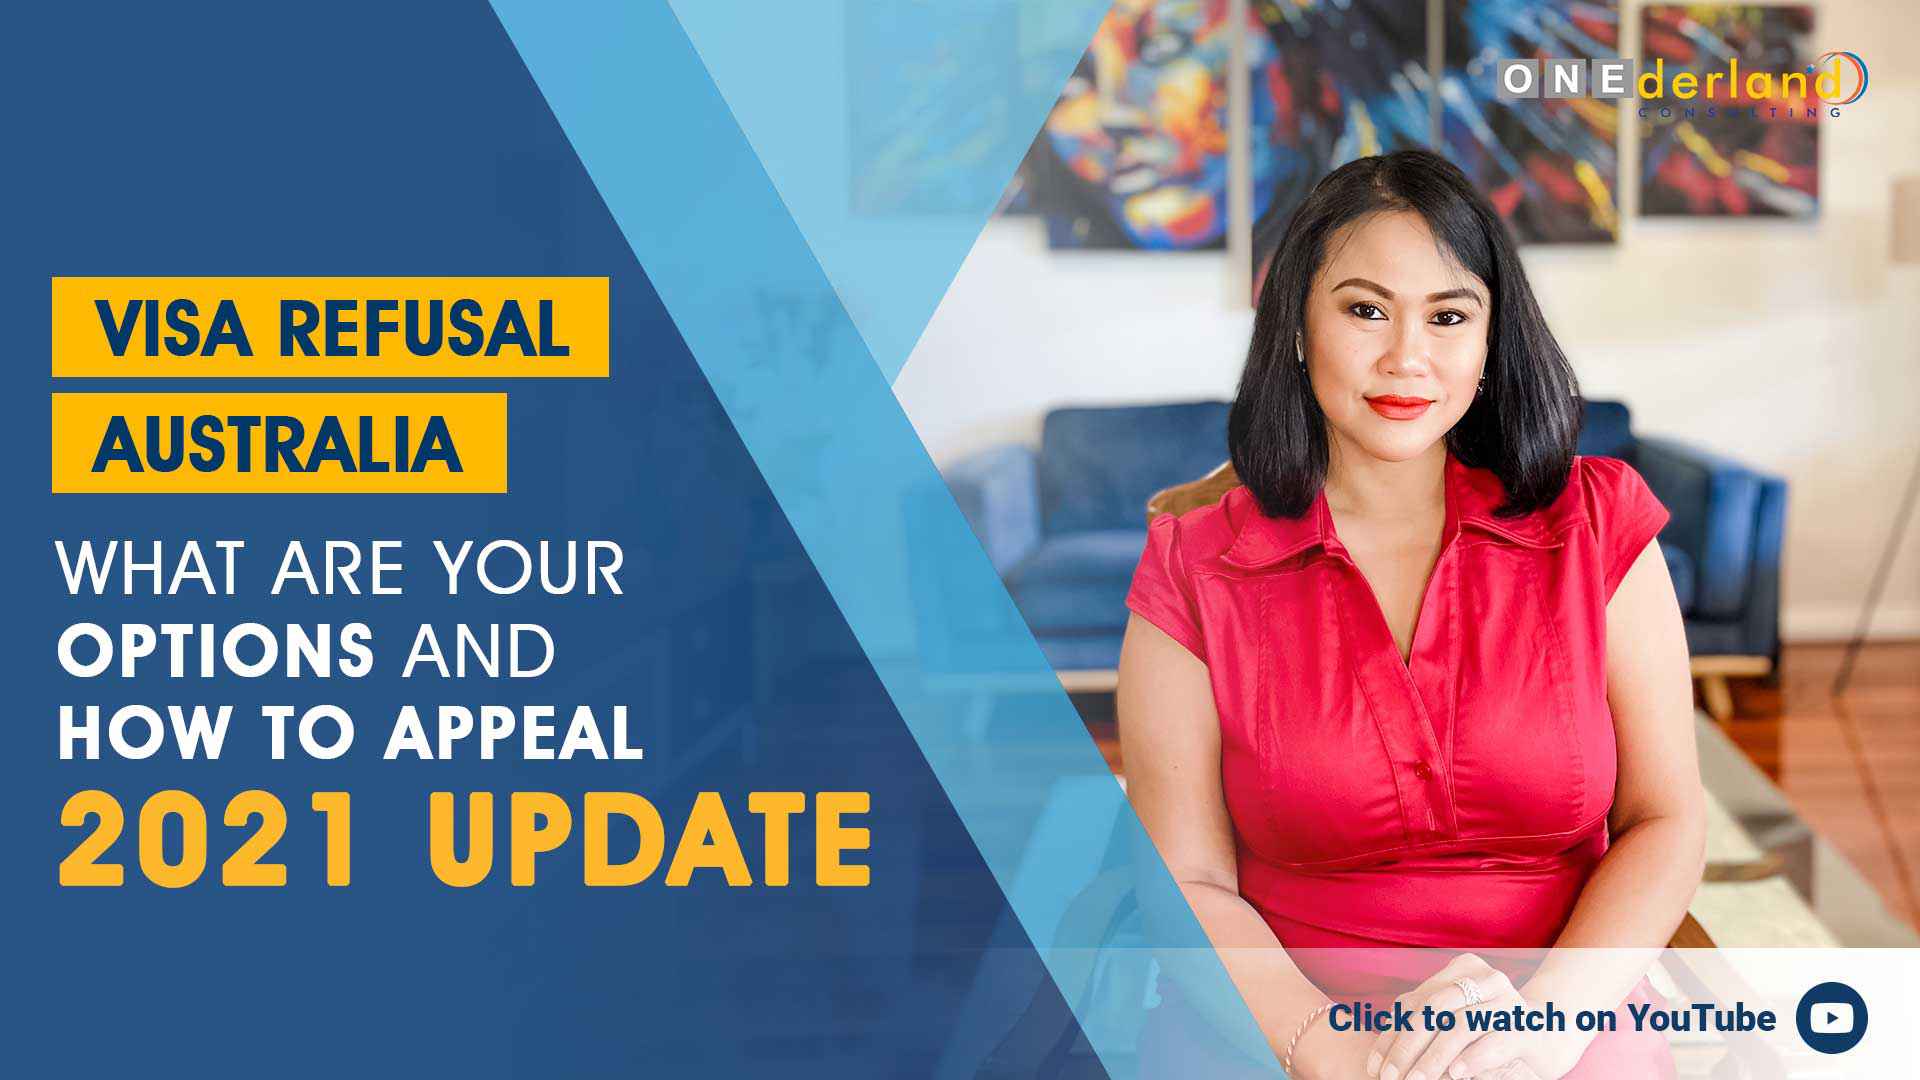 Australian Visa Application Refusal - What are your options and how to appeal 2021